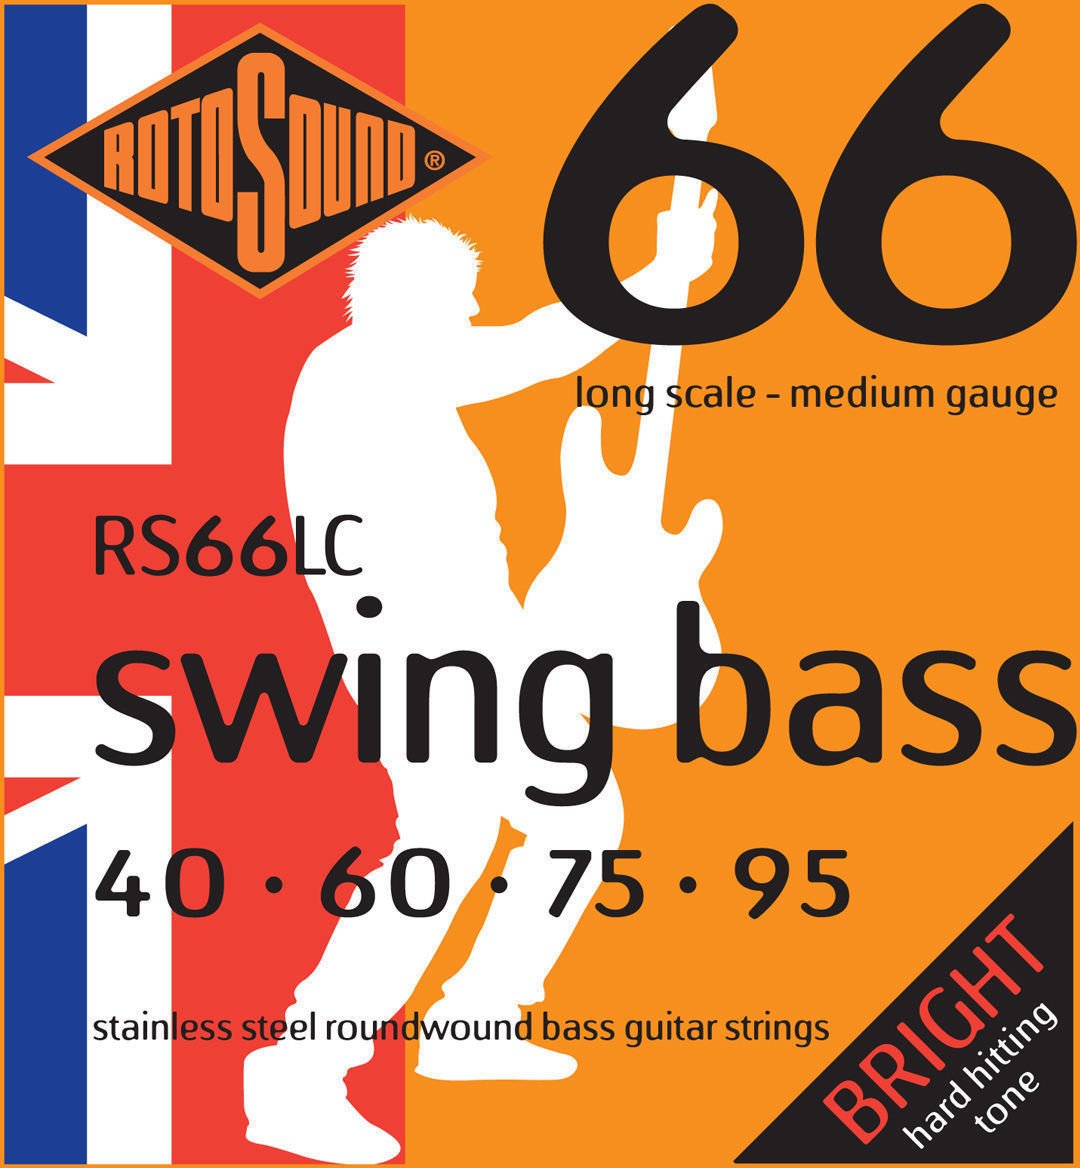 Corde Basso Rotosound RS66LC